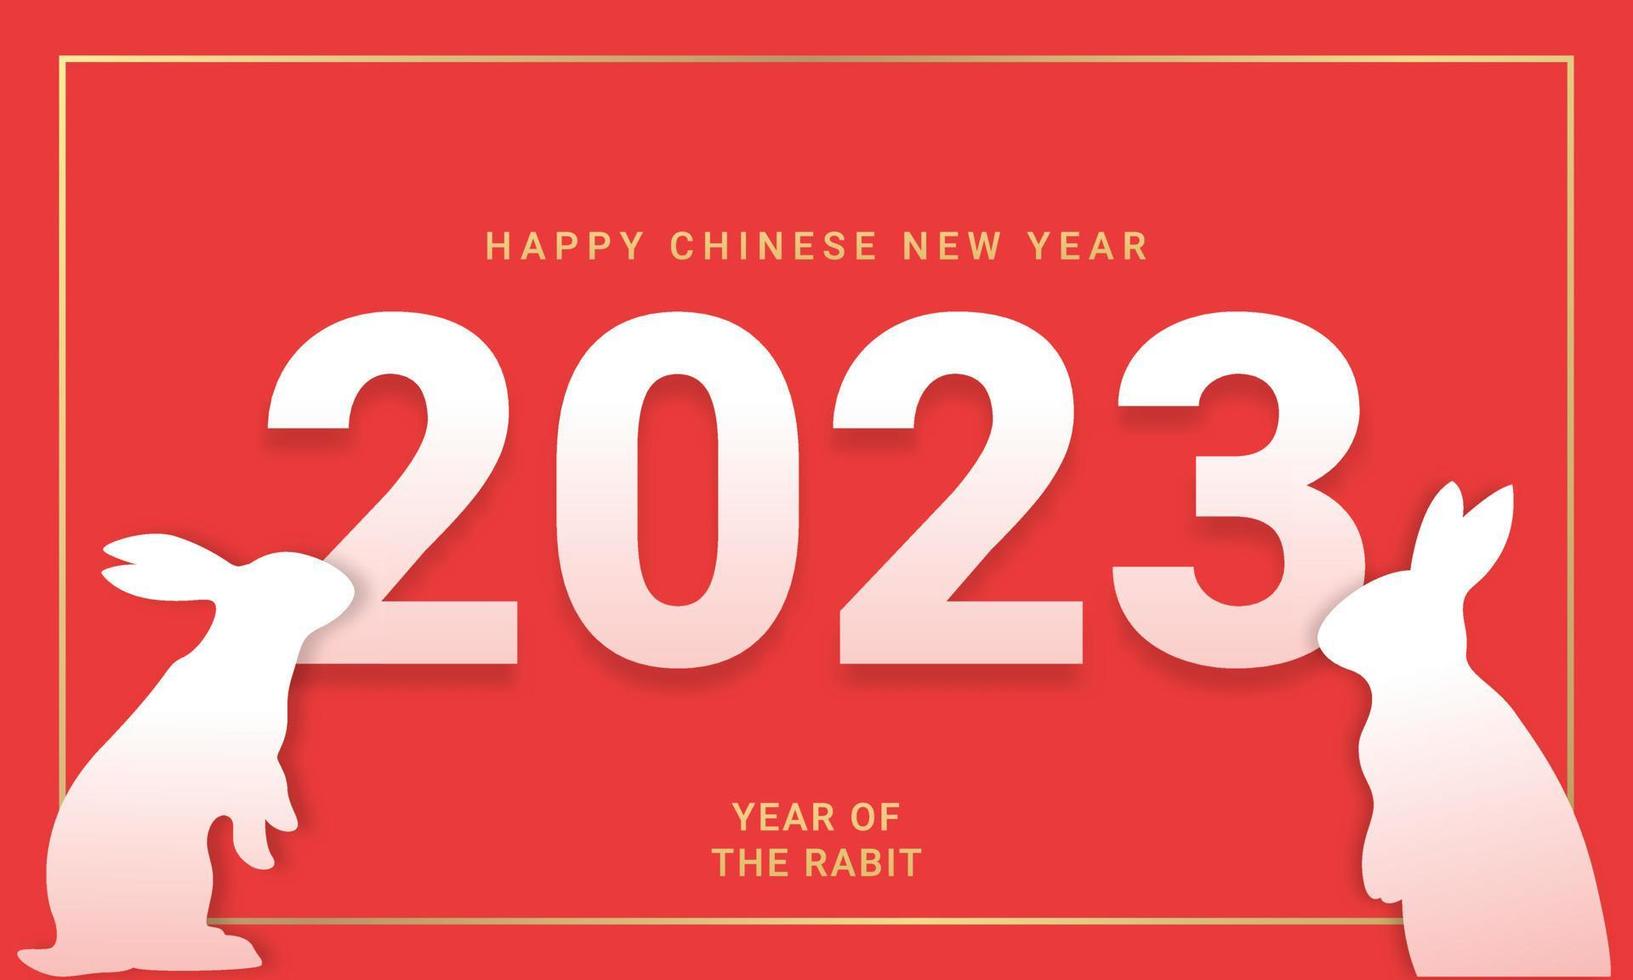 Chinese New Year 2023 art paper style design for greeting card, poster, website banner vector